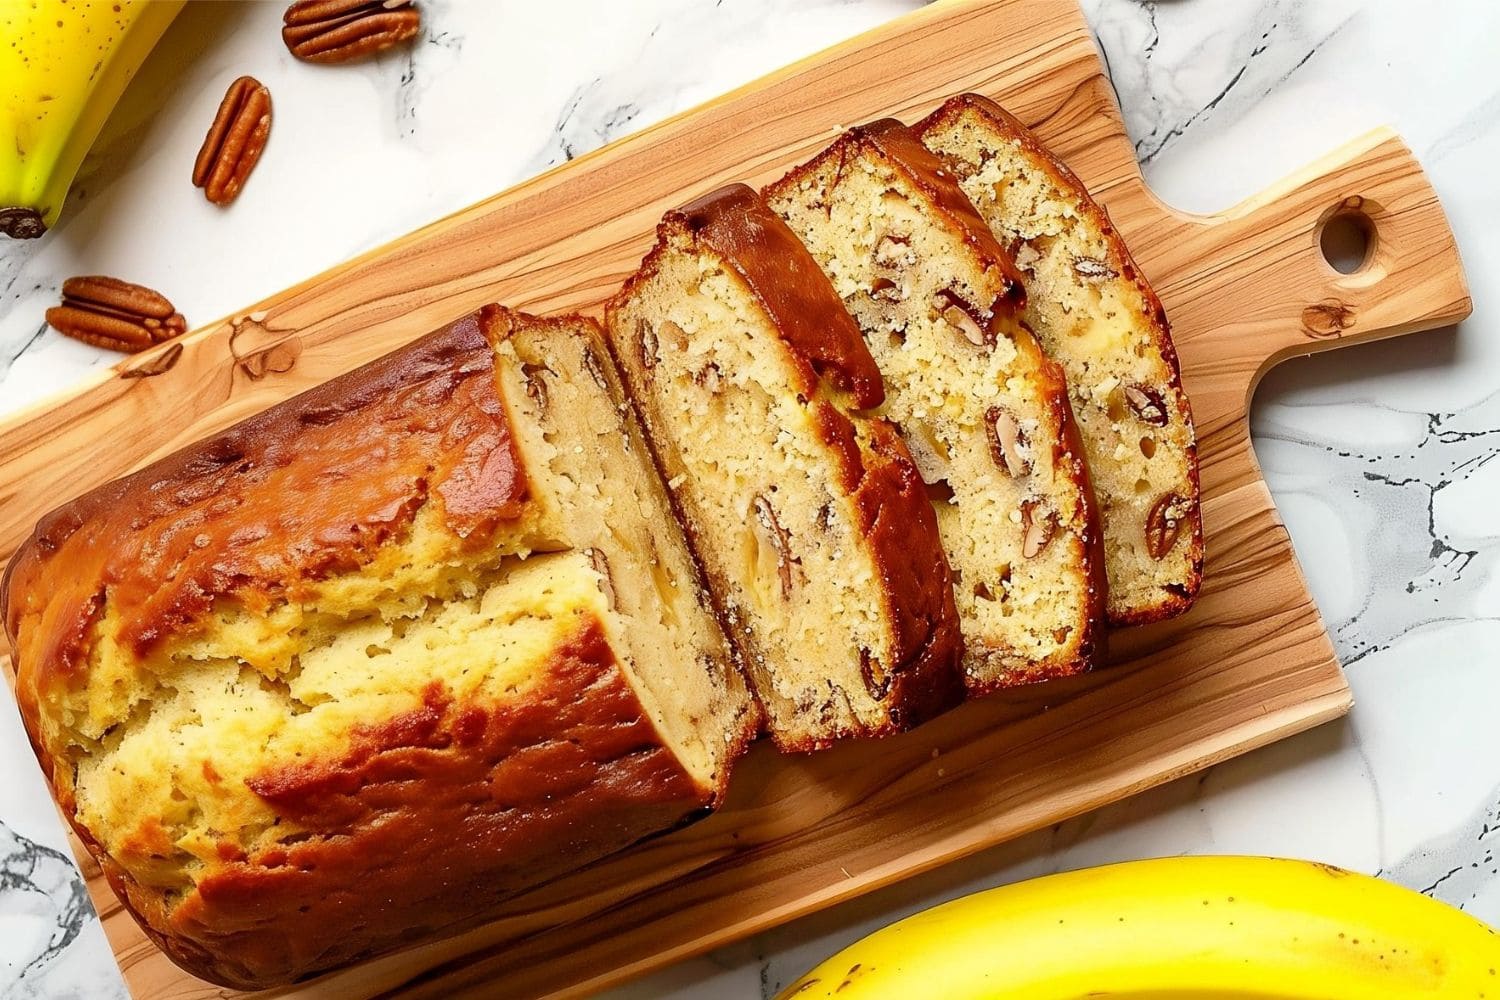 Cake Mix Banana Bread, Sliced, on a Wooden Cutting Board on a White Marble Table with Bananas